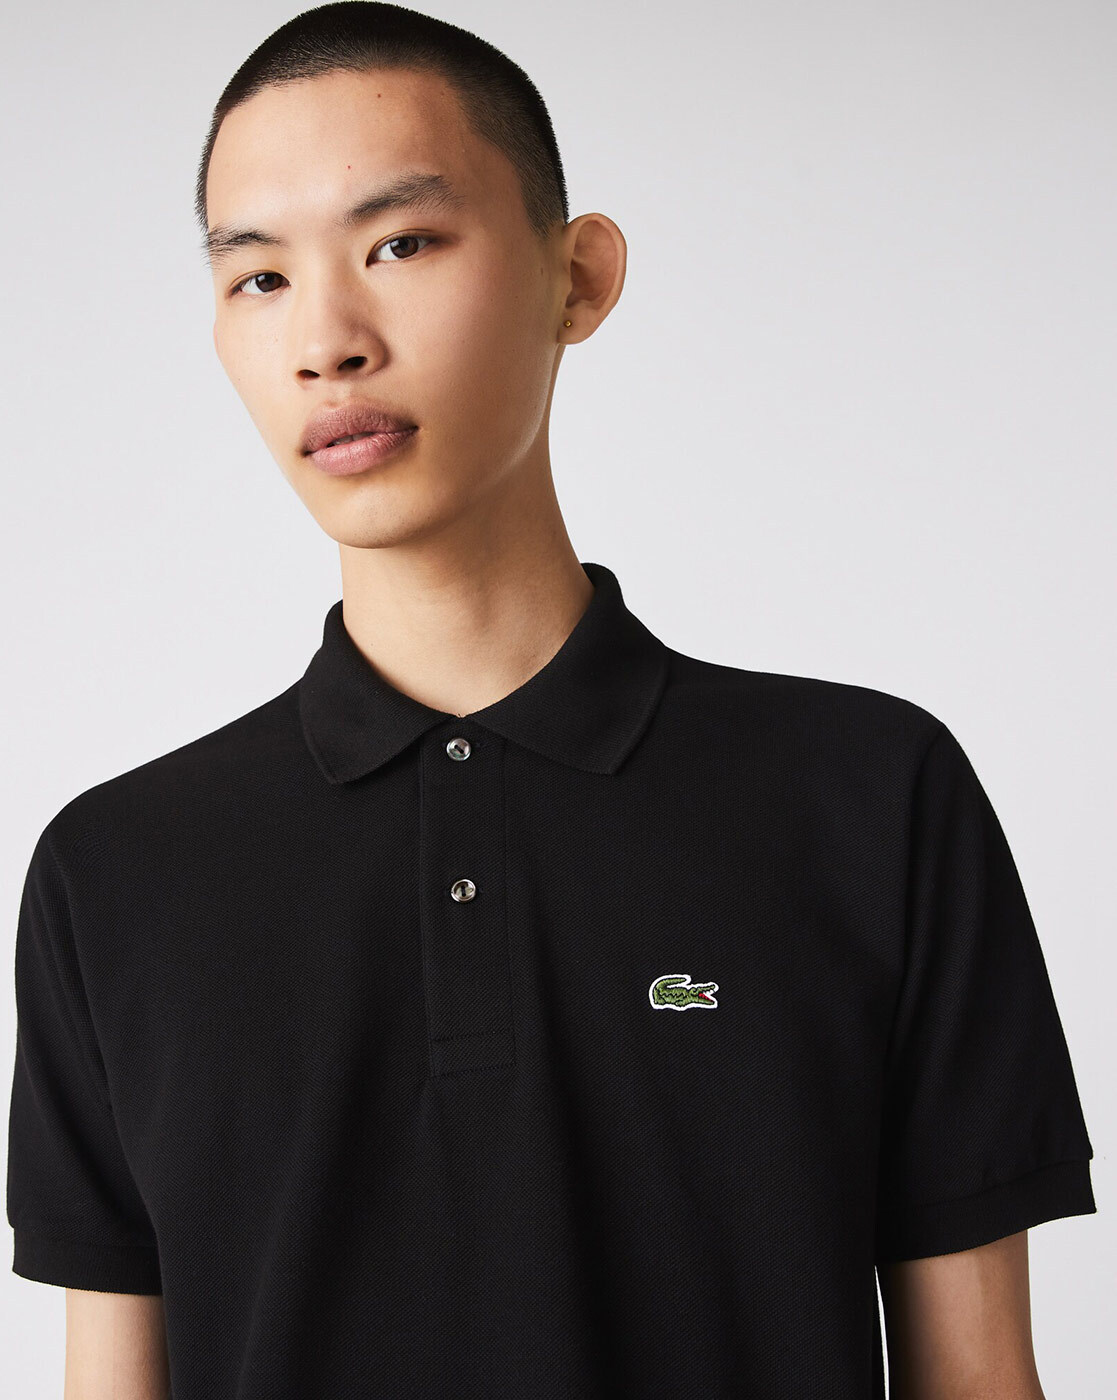 LACOSTE Store Online – Buy LACOSTE products online in India. - Ajio